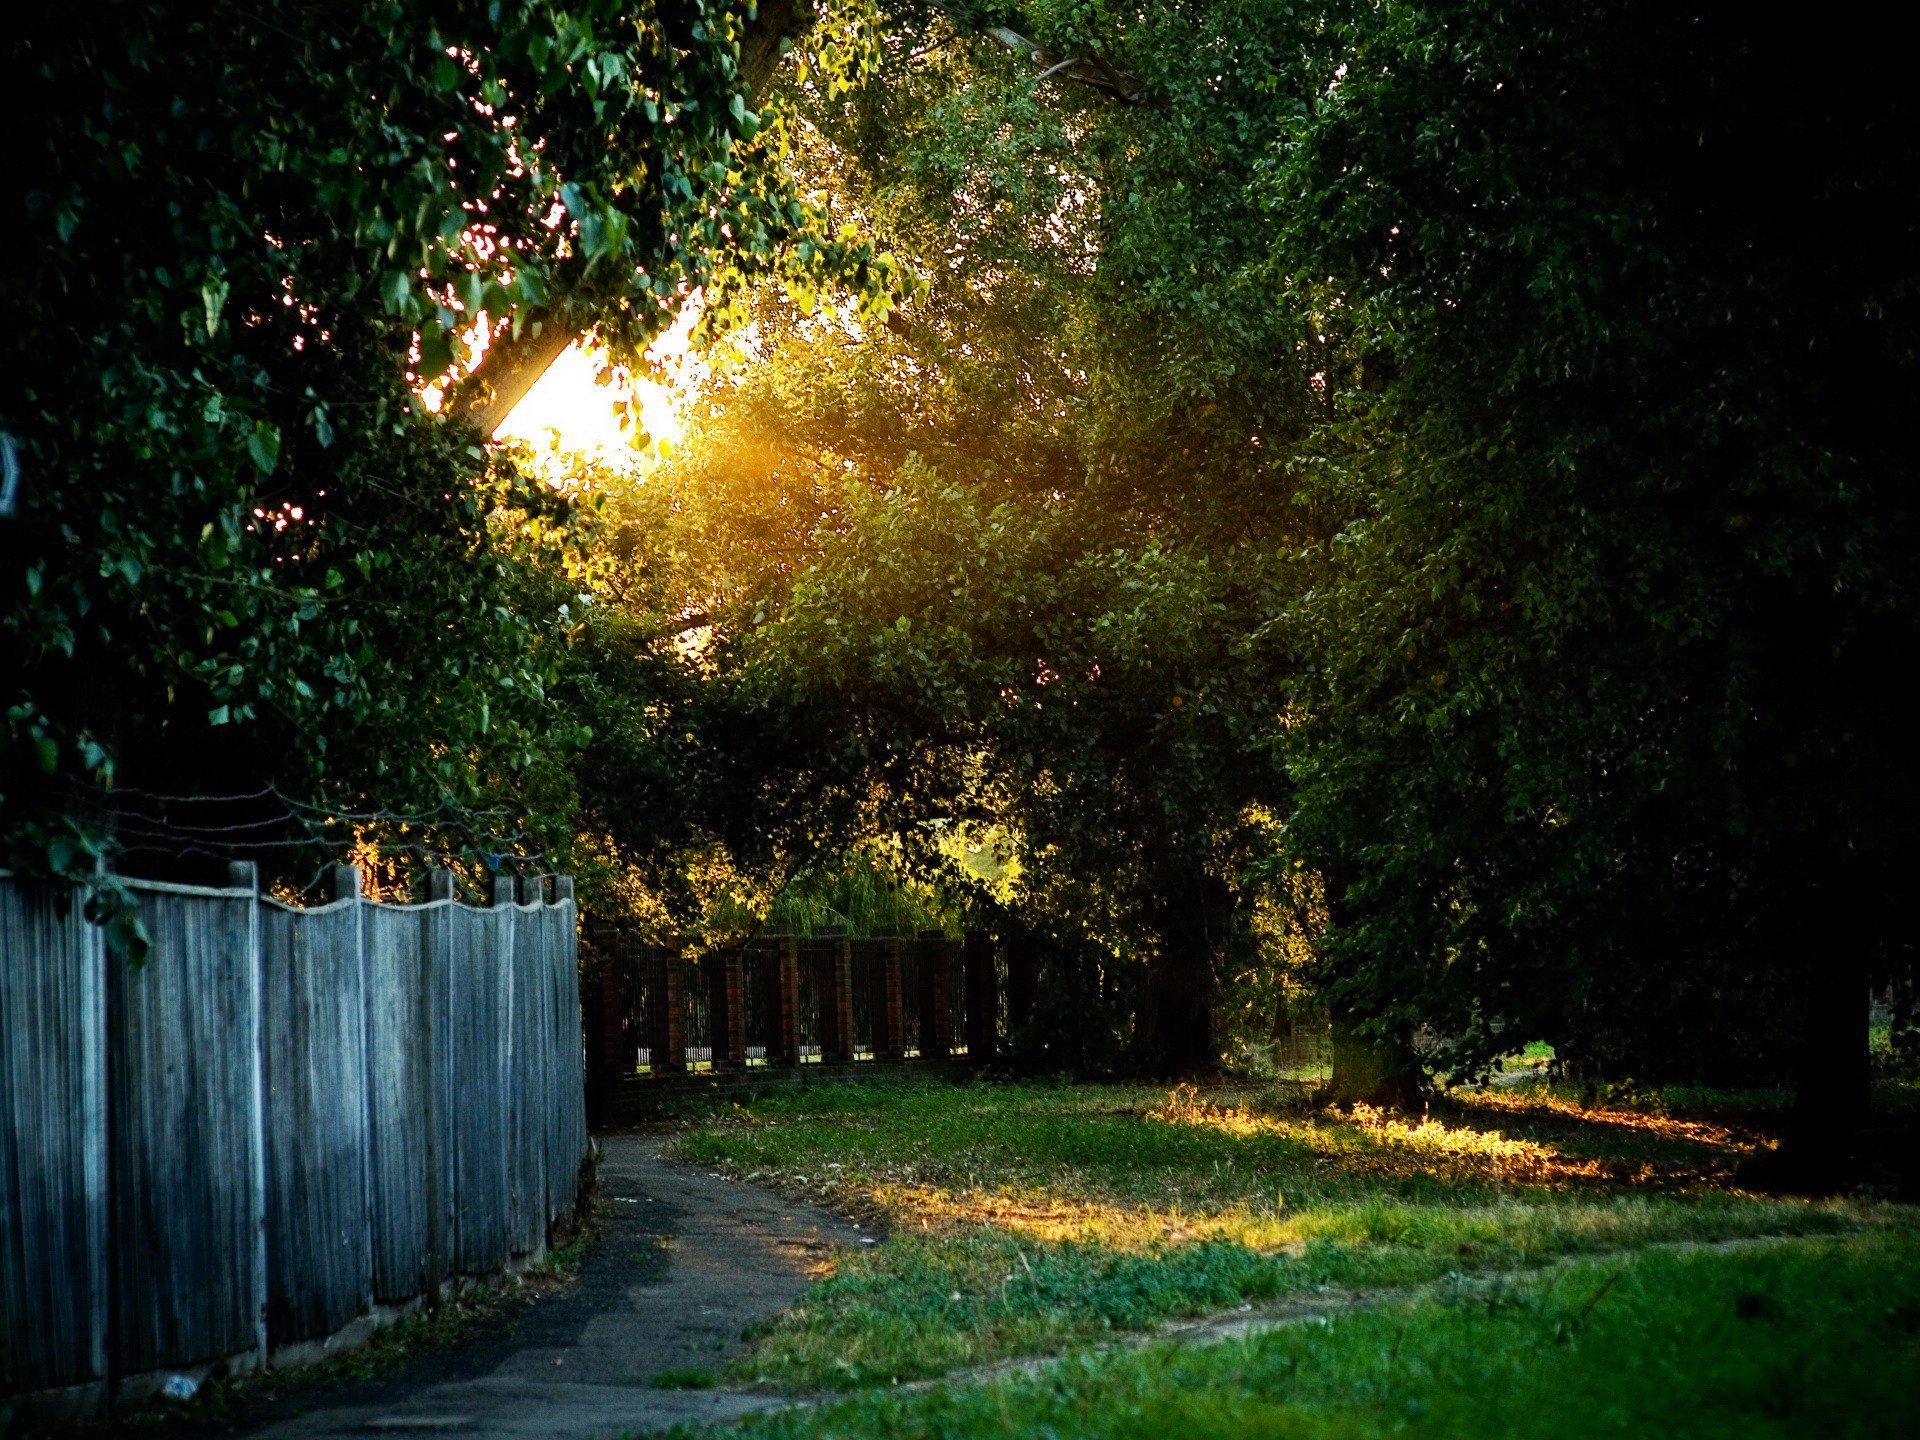 enclosure, wire, nature, trees, shine, light, path, fence, trail, fencing, courtyard, yard 5K